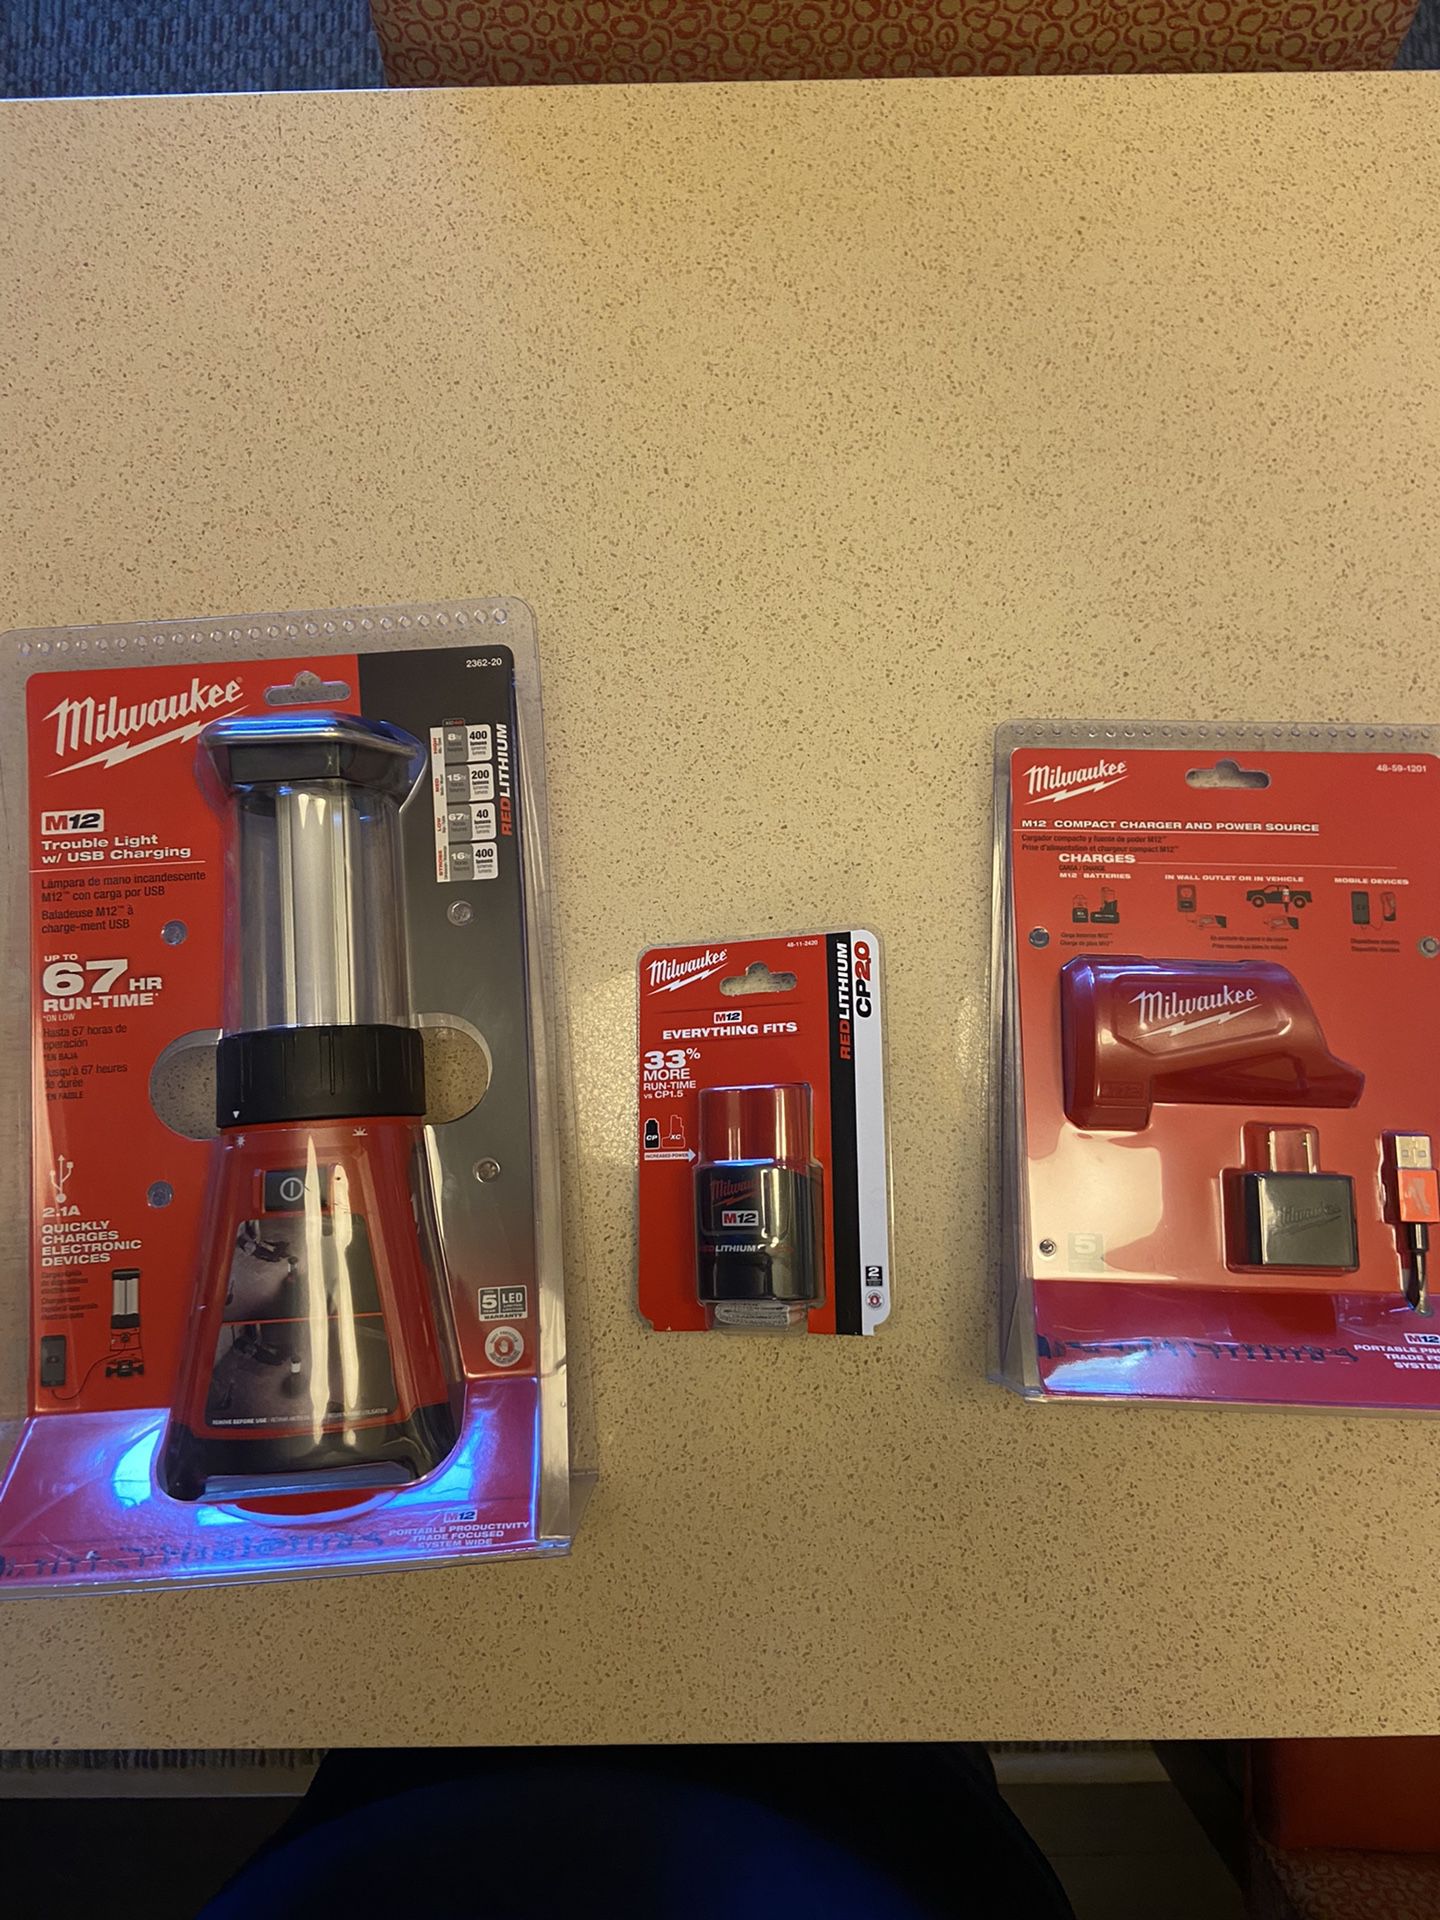 Milwaukee tool - M12 Trouble Light along with a 2.0 M12 Battery and Charger